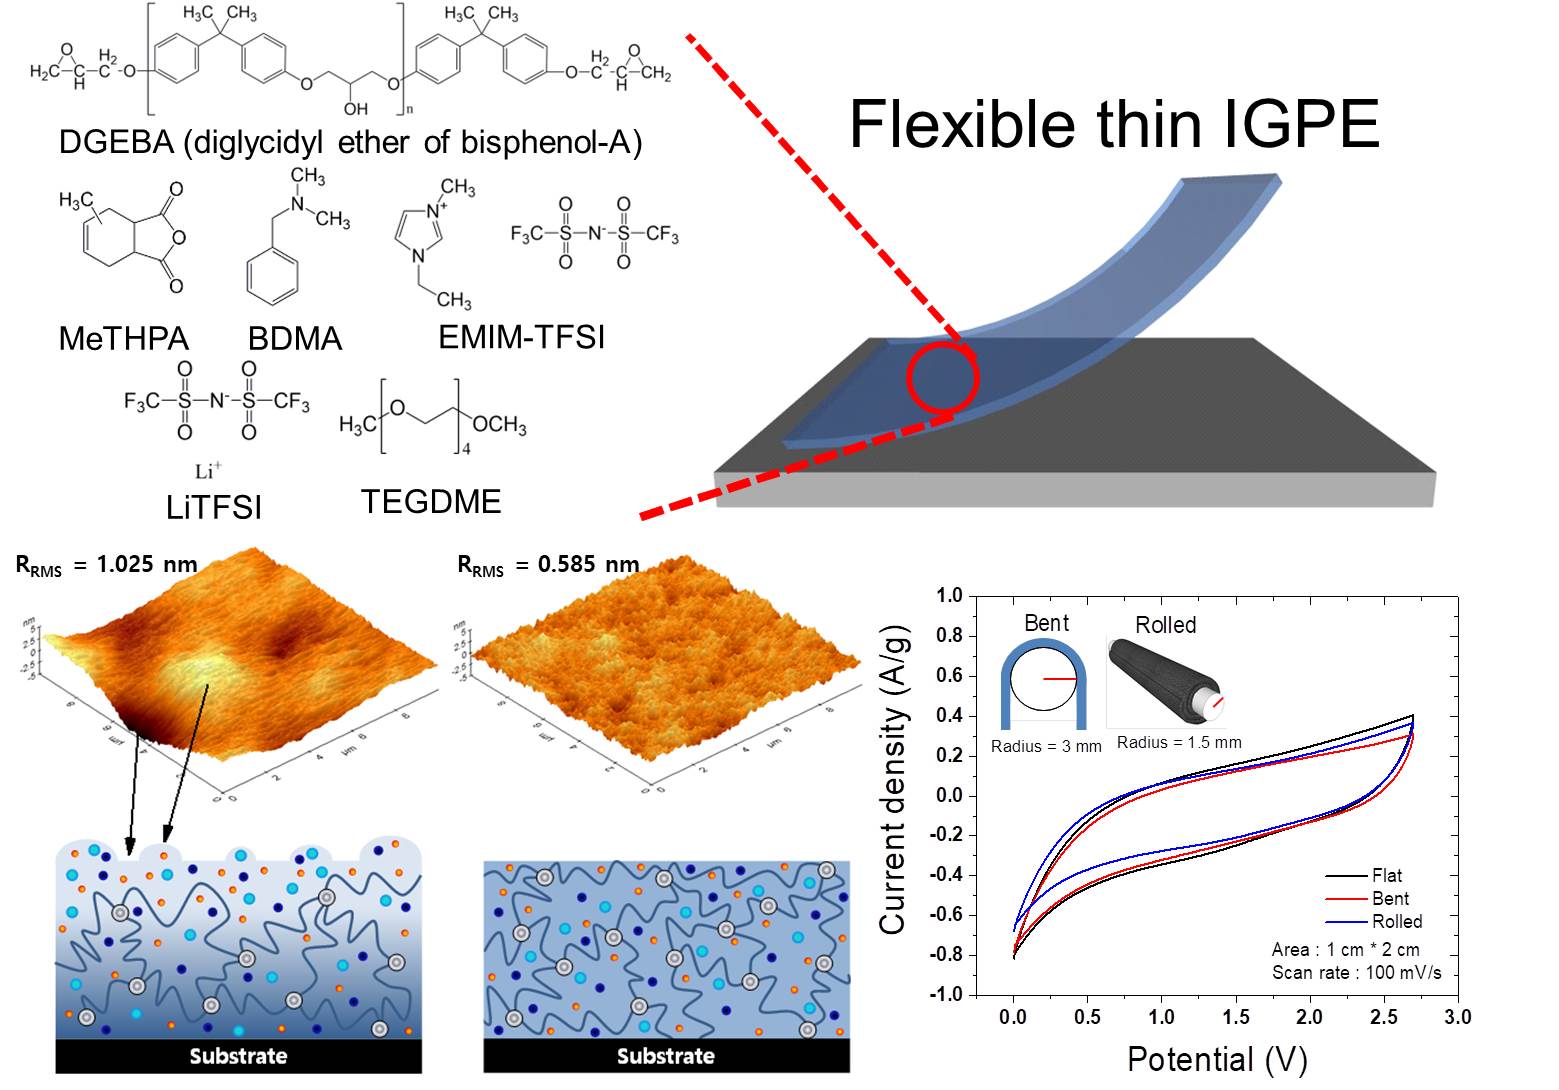 Highly Flexible and Stable Solid-State Supercapacitors Based on a Homogeneous Thin Ion Gel Polymer Electrolyte Using a Poly(dimethylsiloxane) Stamp